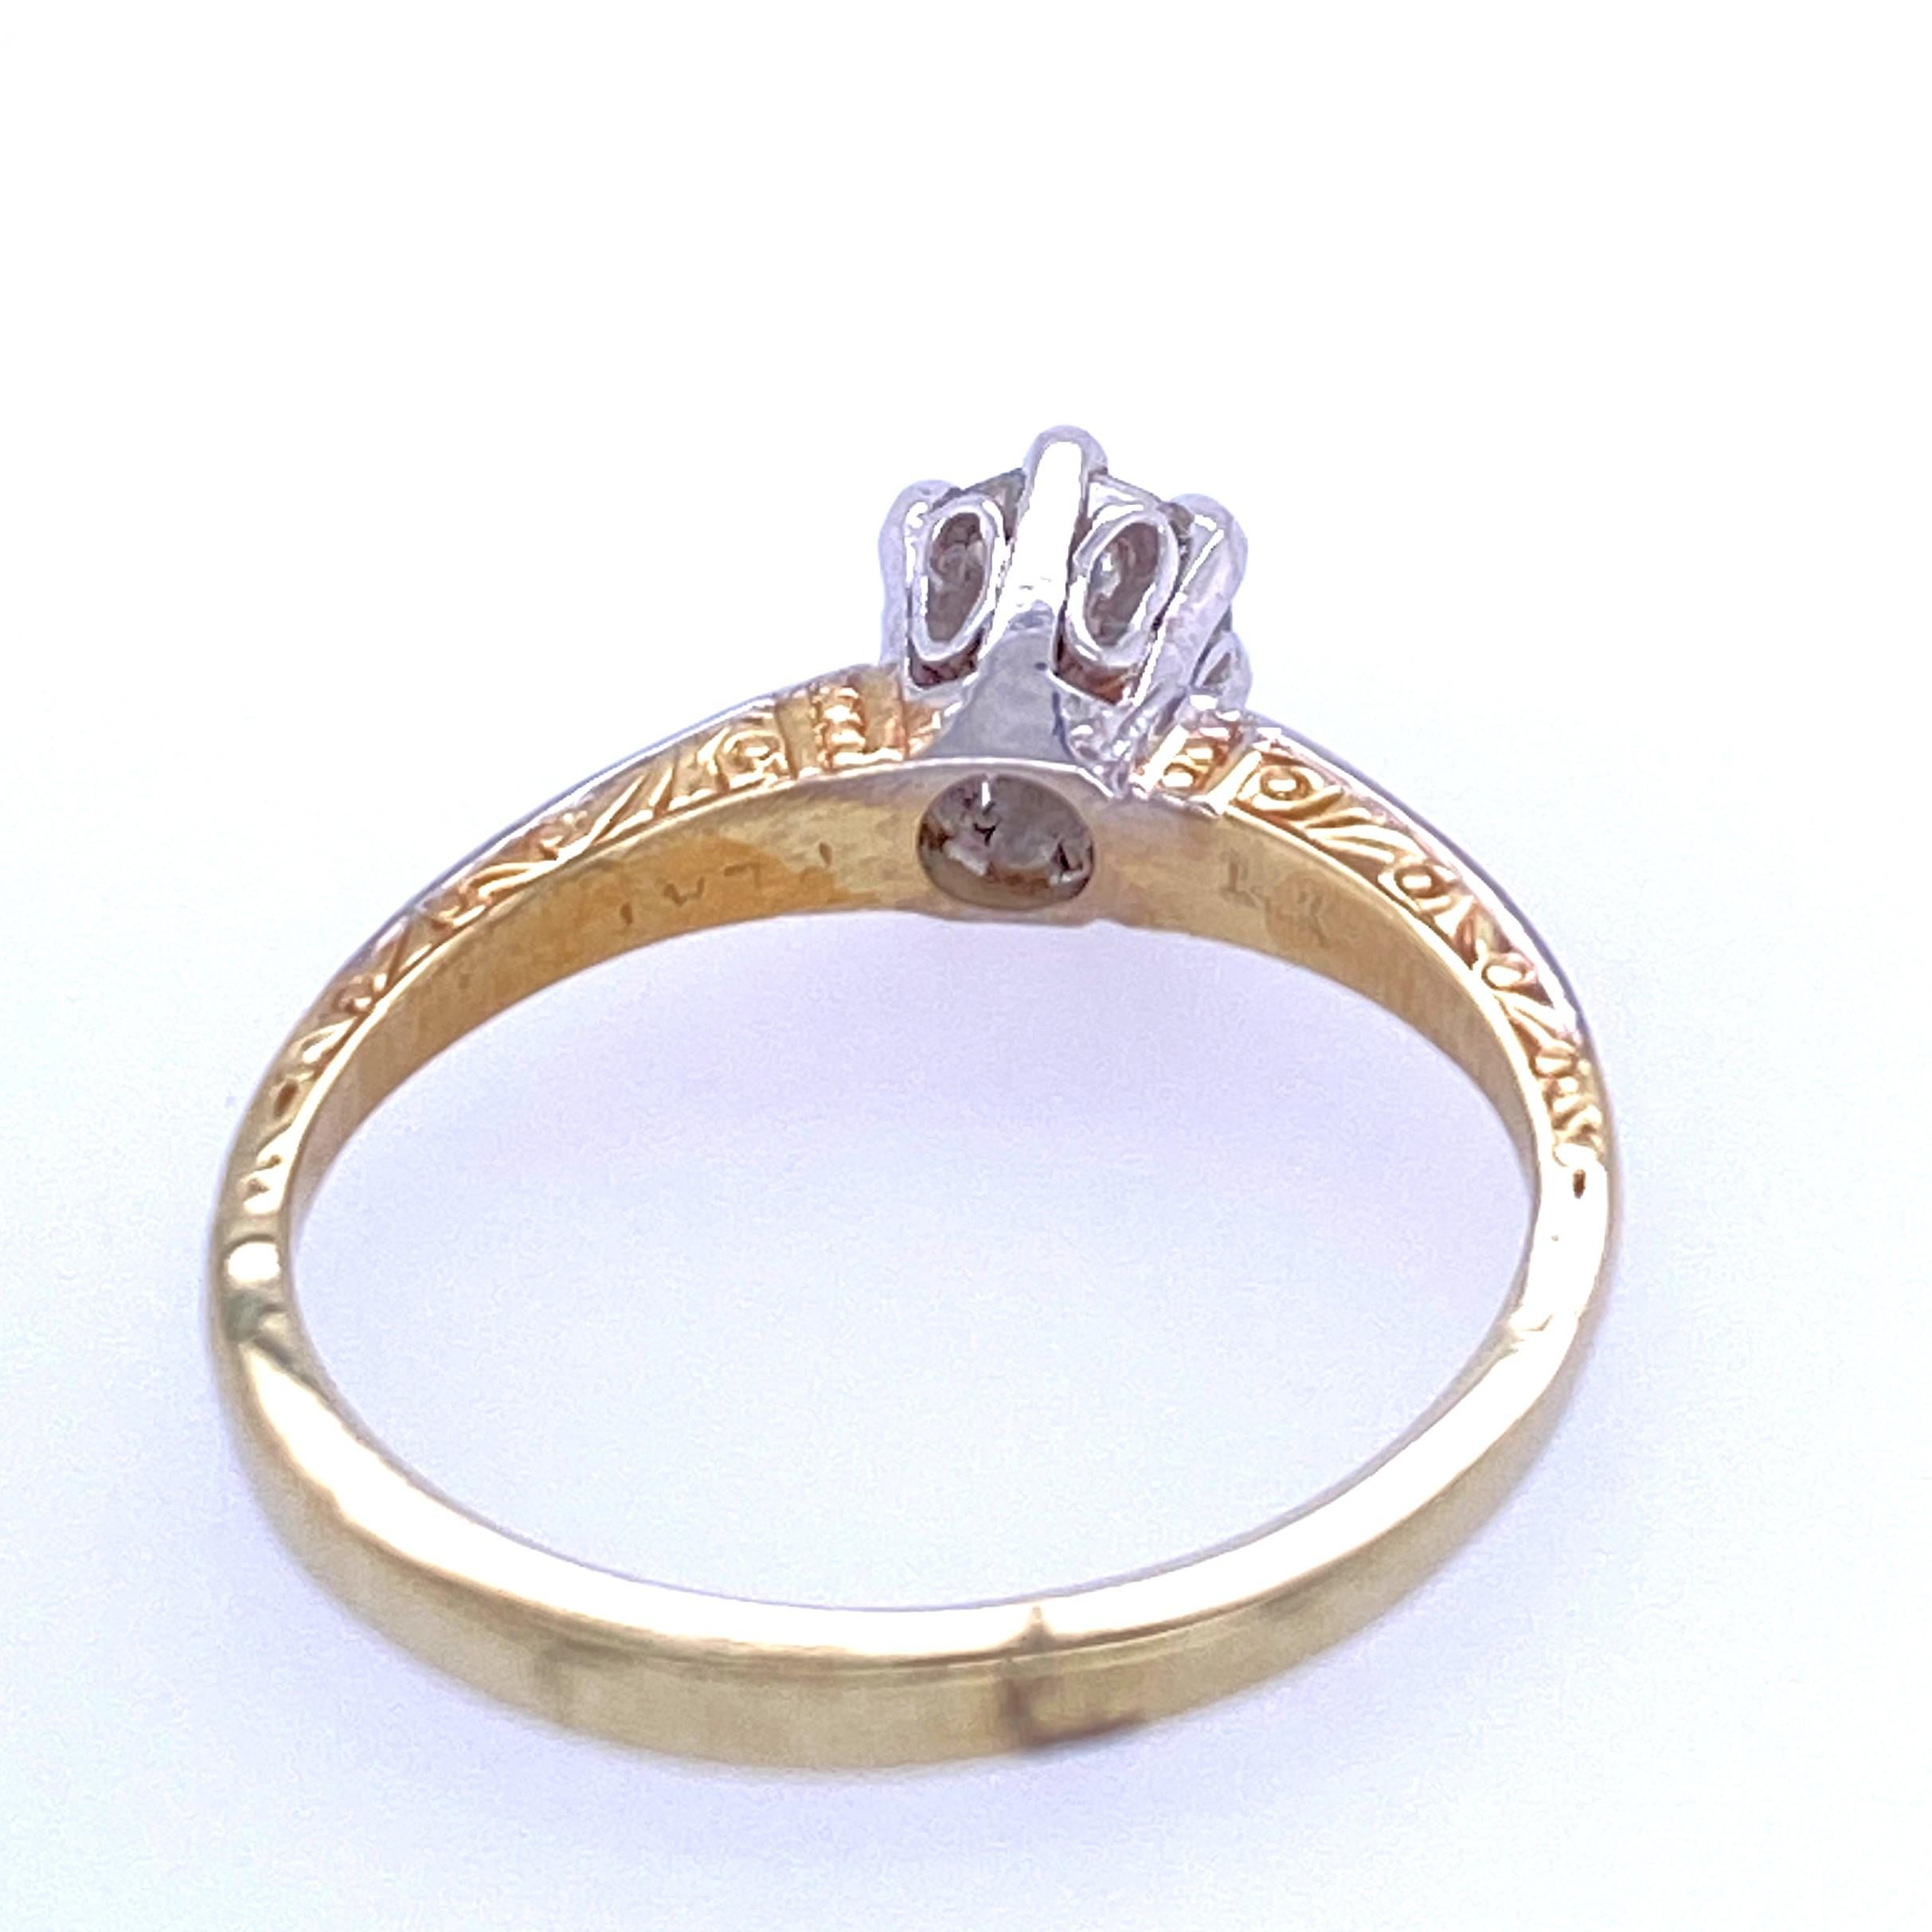 Modernist 14 Karat Yellow and White Gold Engagement Ring